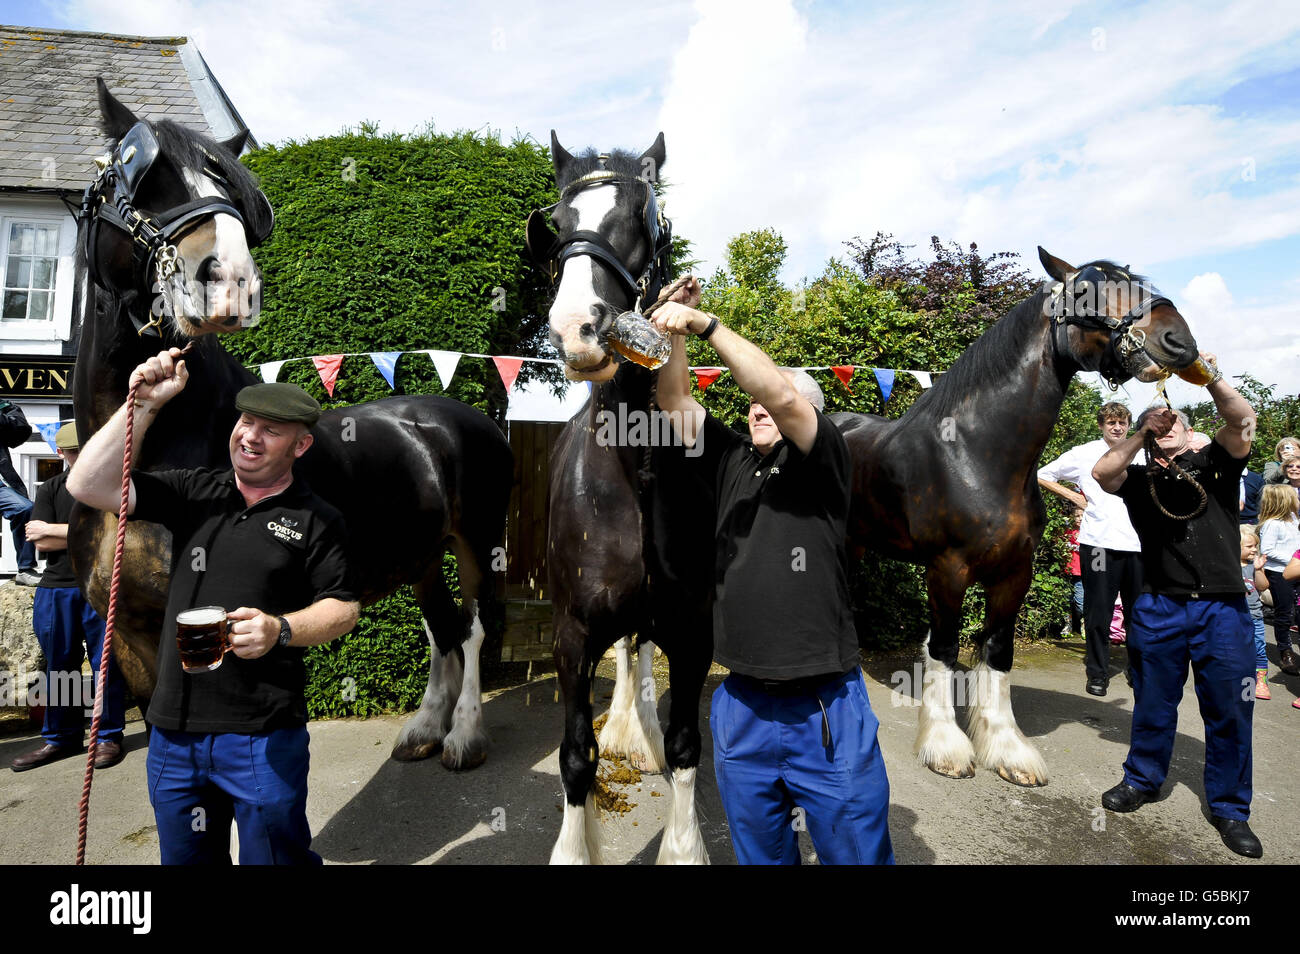 Monty, the shire horse gulps a pint of beer outside the Raven Inn in Poulshot, Wiltshire as he begins his annual two-week holiday. Monty, a working Wadworth brewery horse, who along with his fellow dray horses Prince and Max delivers beer to Wiltshire pubs all year long. All the horses are given a pint of beer before being released into local fields for their two week holiday by the brewery, who have been employing shire horses for more than 100 years to deliver beers to local pubs. Prince, Monty and Max are three of the last remaining working shires left in the UK brewing industry. Stock Photo